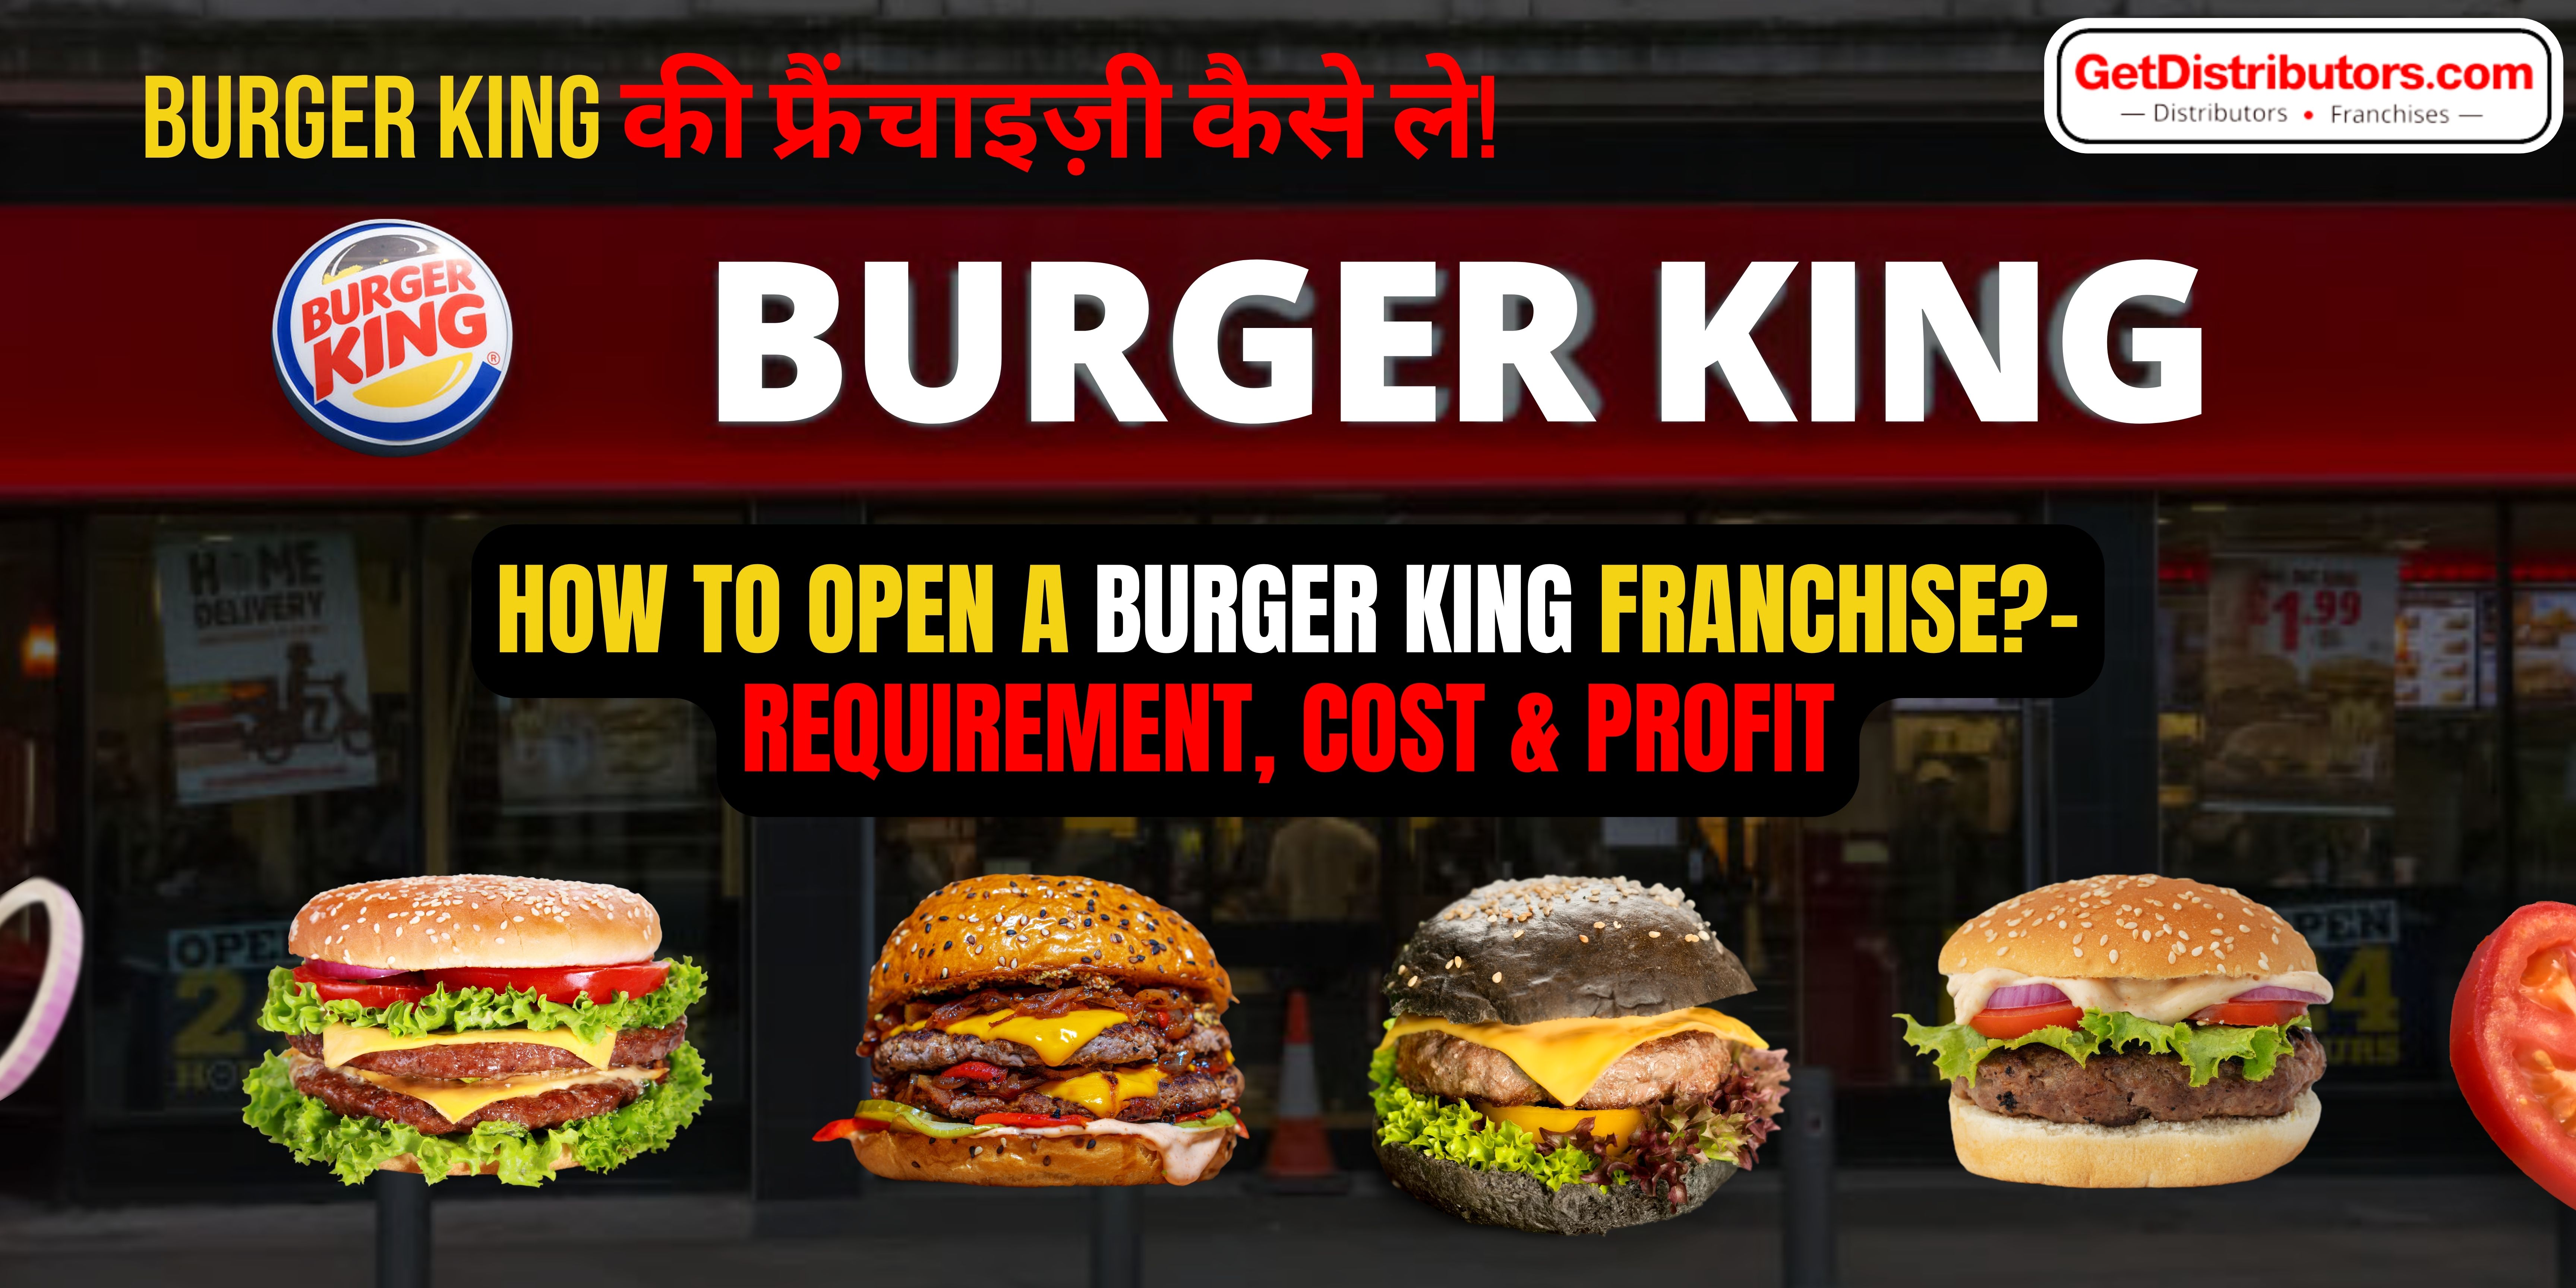 How to open a Burger King franchise